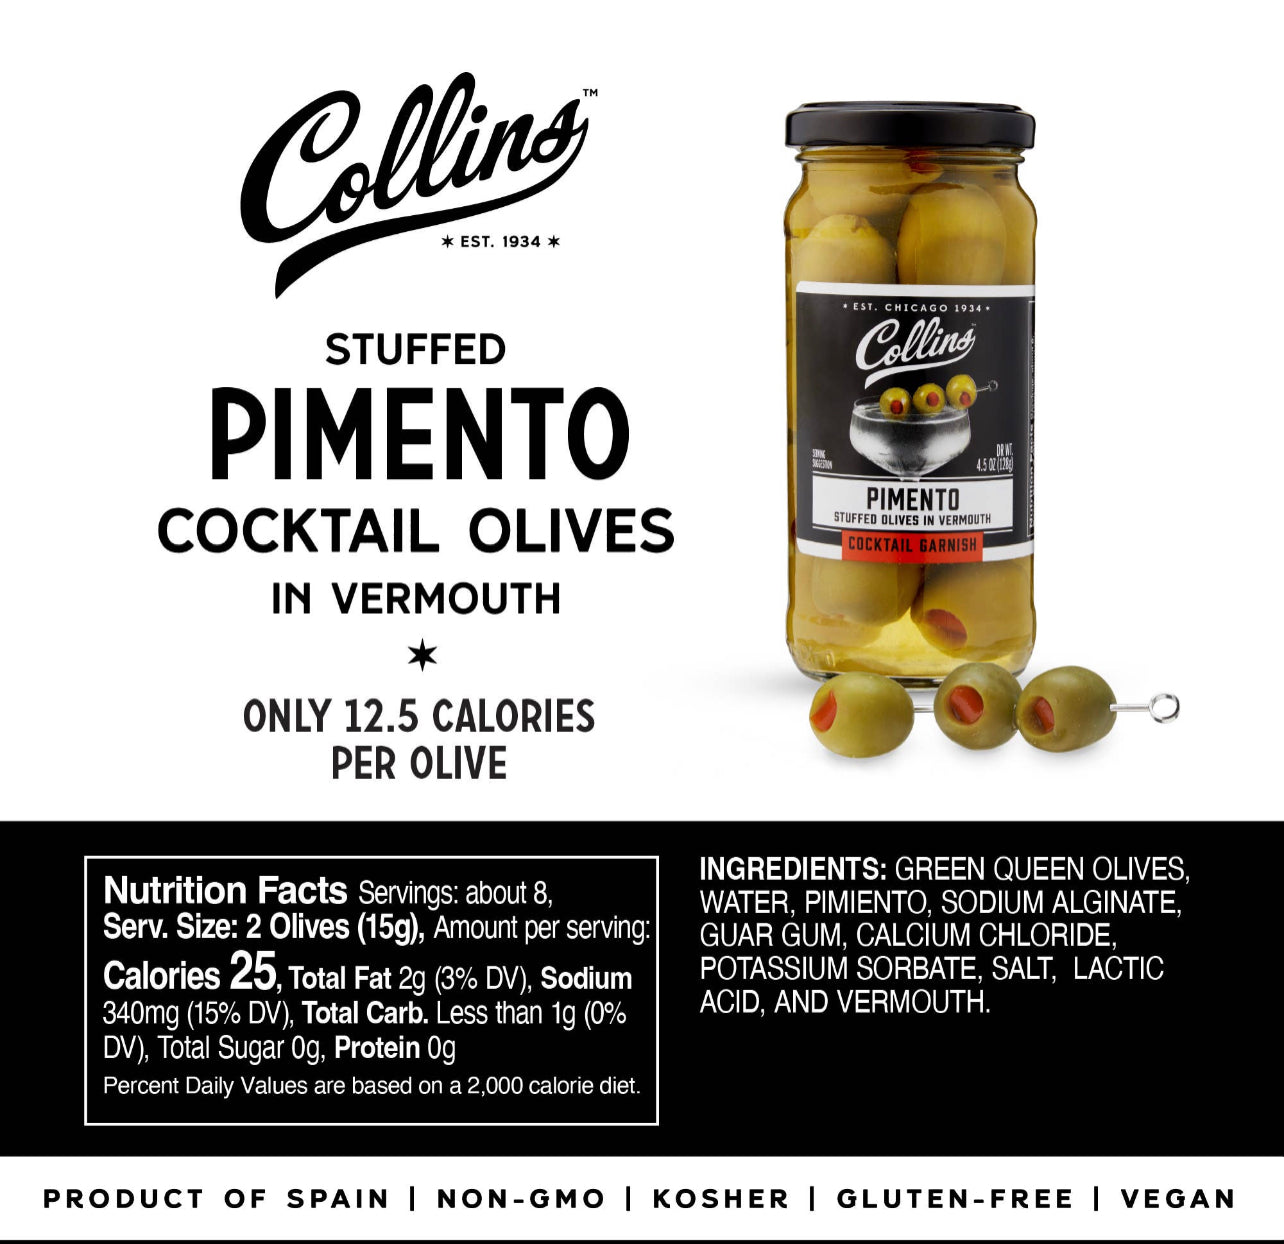 nutritional information for stuffed pimento cocktail olives in vermouth